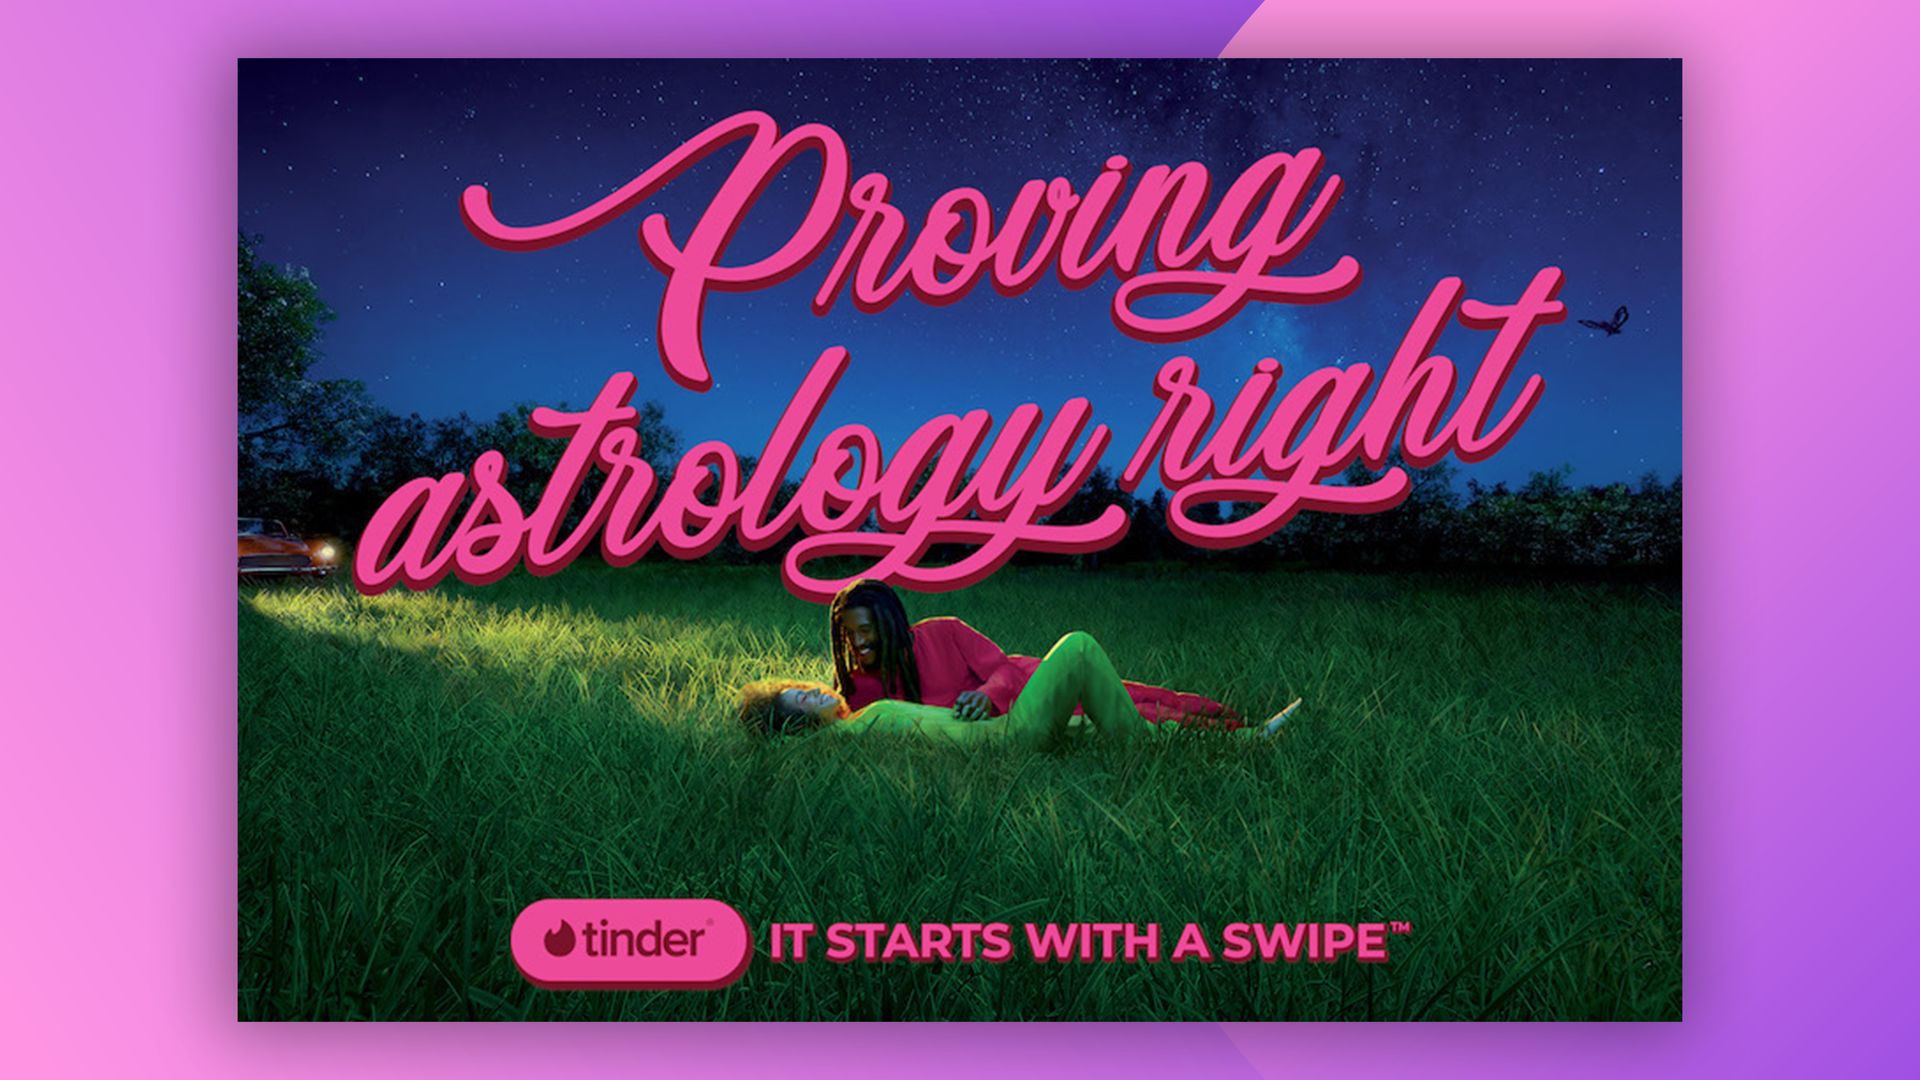 Tinder's first global ad campaign is delightfully maximalist Creative